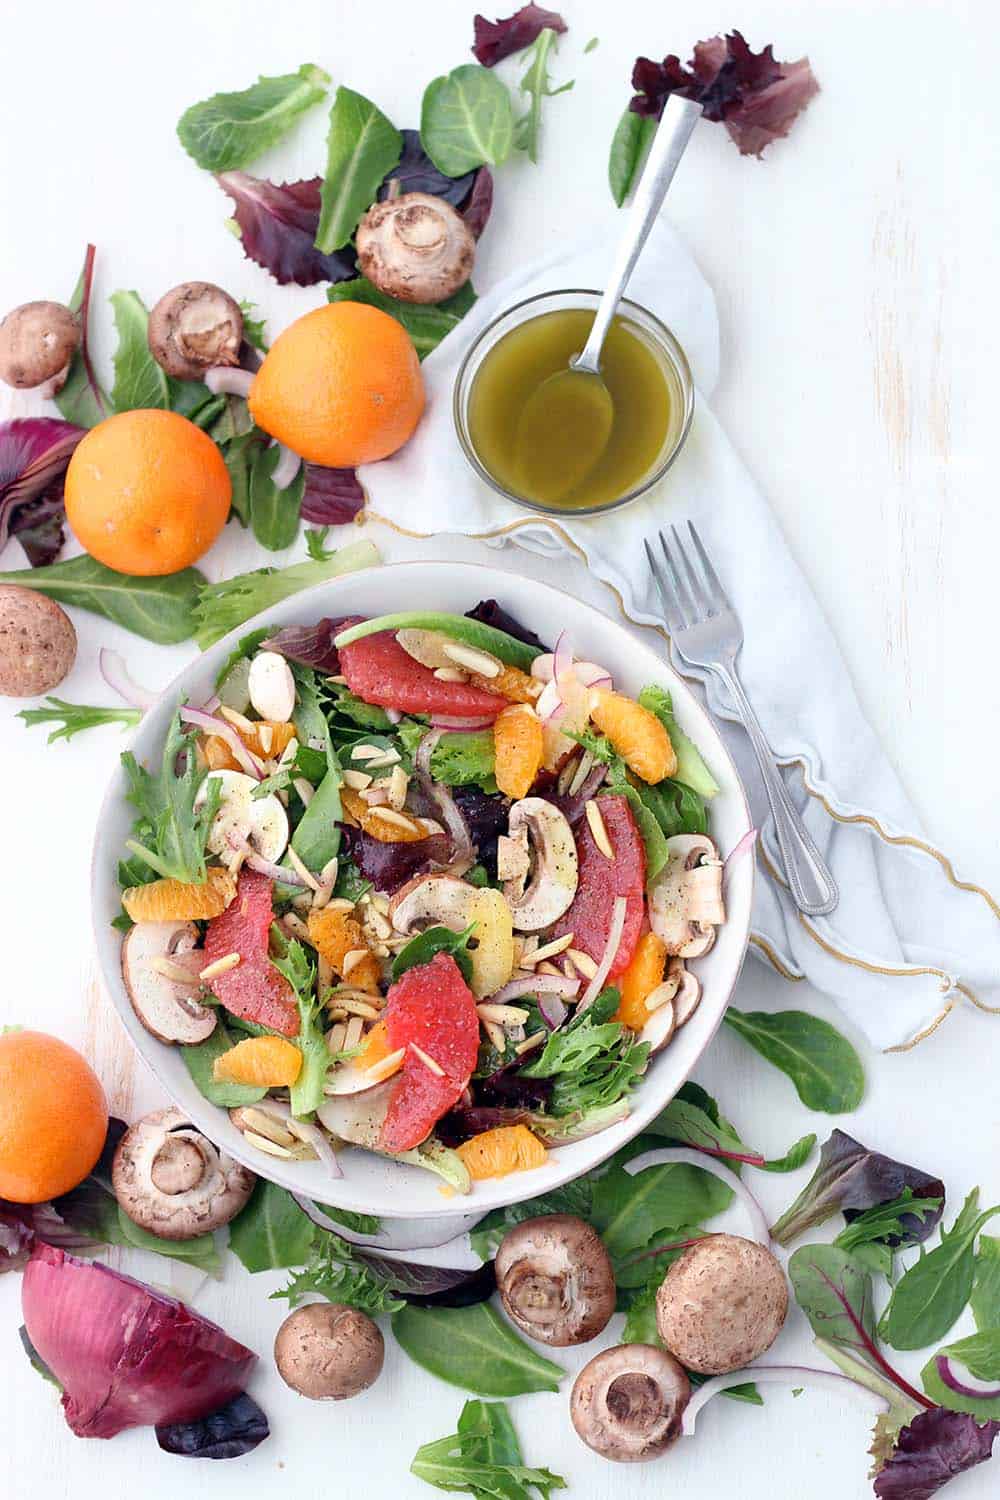 This delicious Winter Citrus Salad with Red Wine Vinaigrette is packed with seasonal Mandarin oranges and grapefruit. It's tossed with thinly sliced mushrooms, toasted almonds, and a versatile red wine vinaigrette, and is a great recipe for meal prepping!